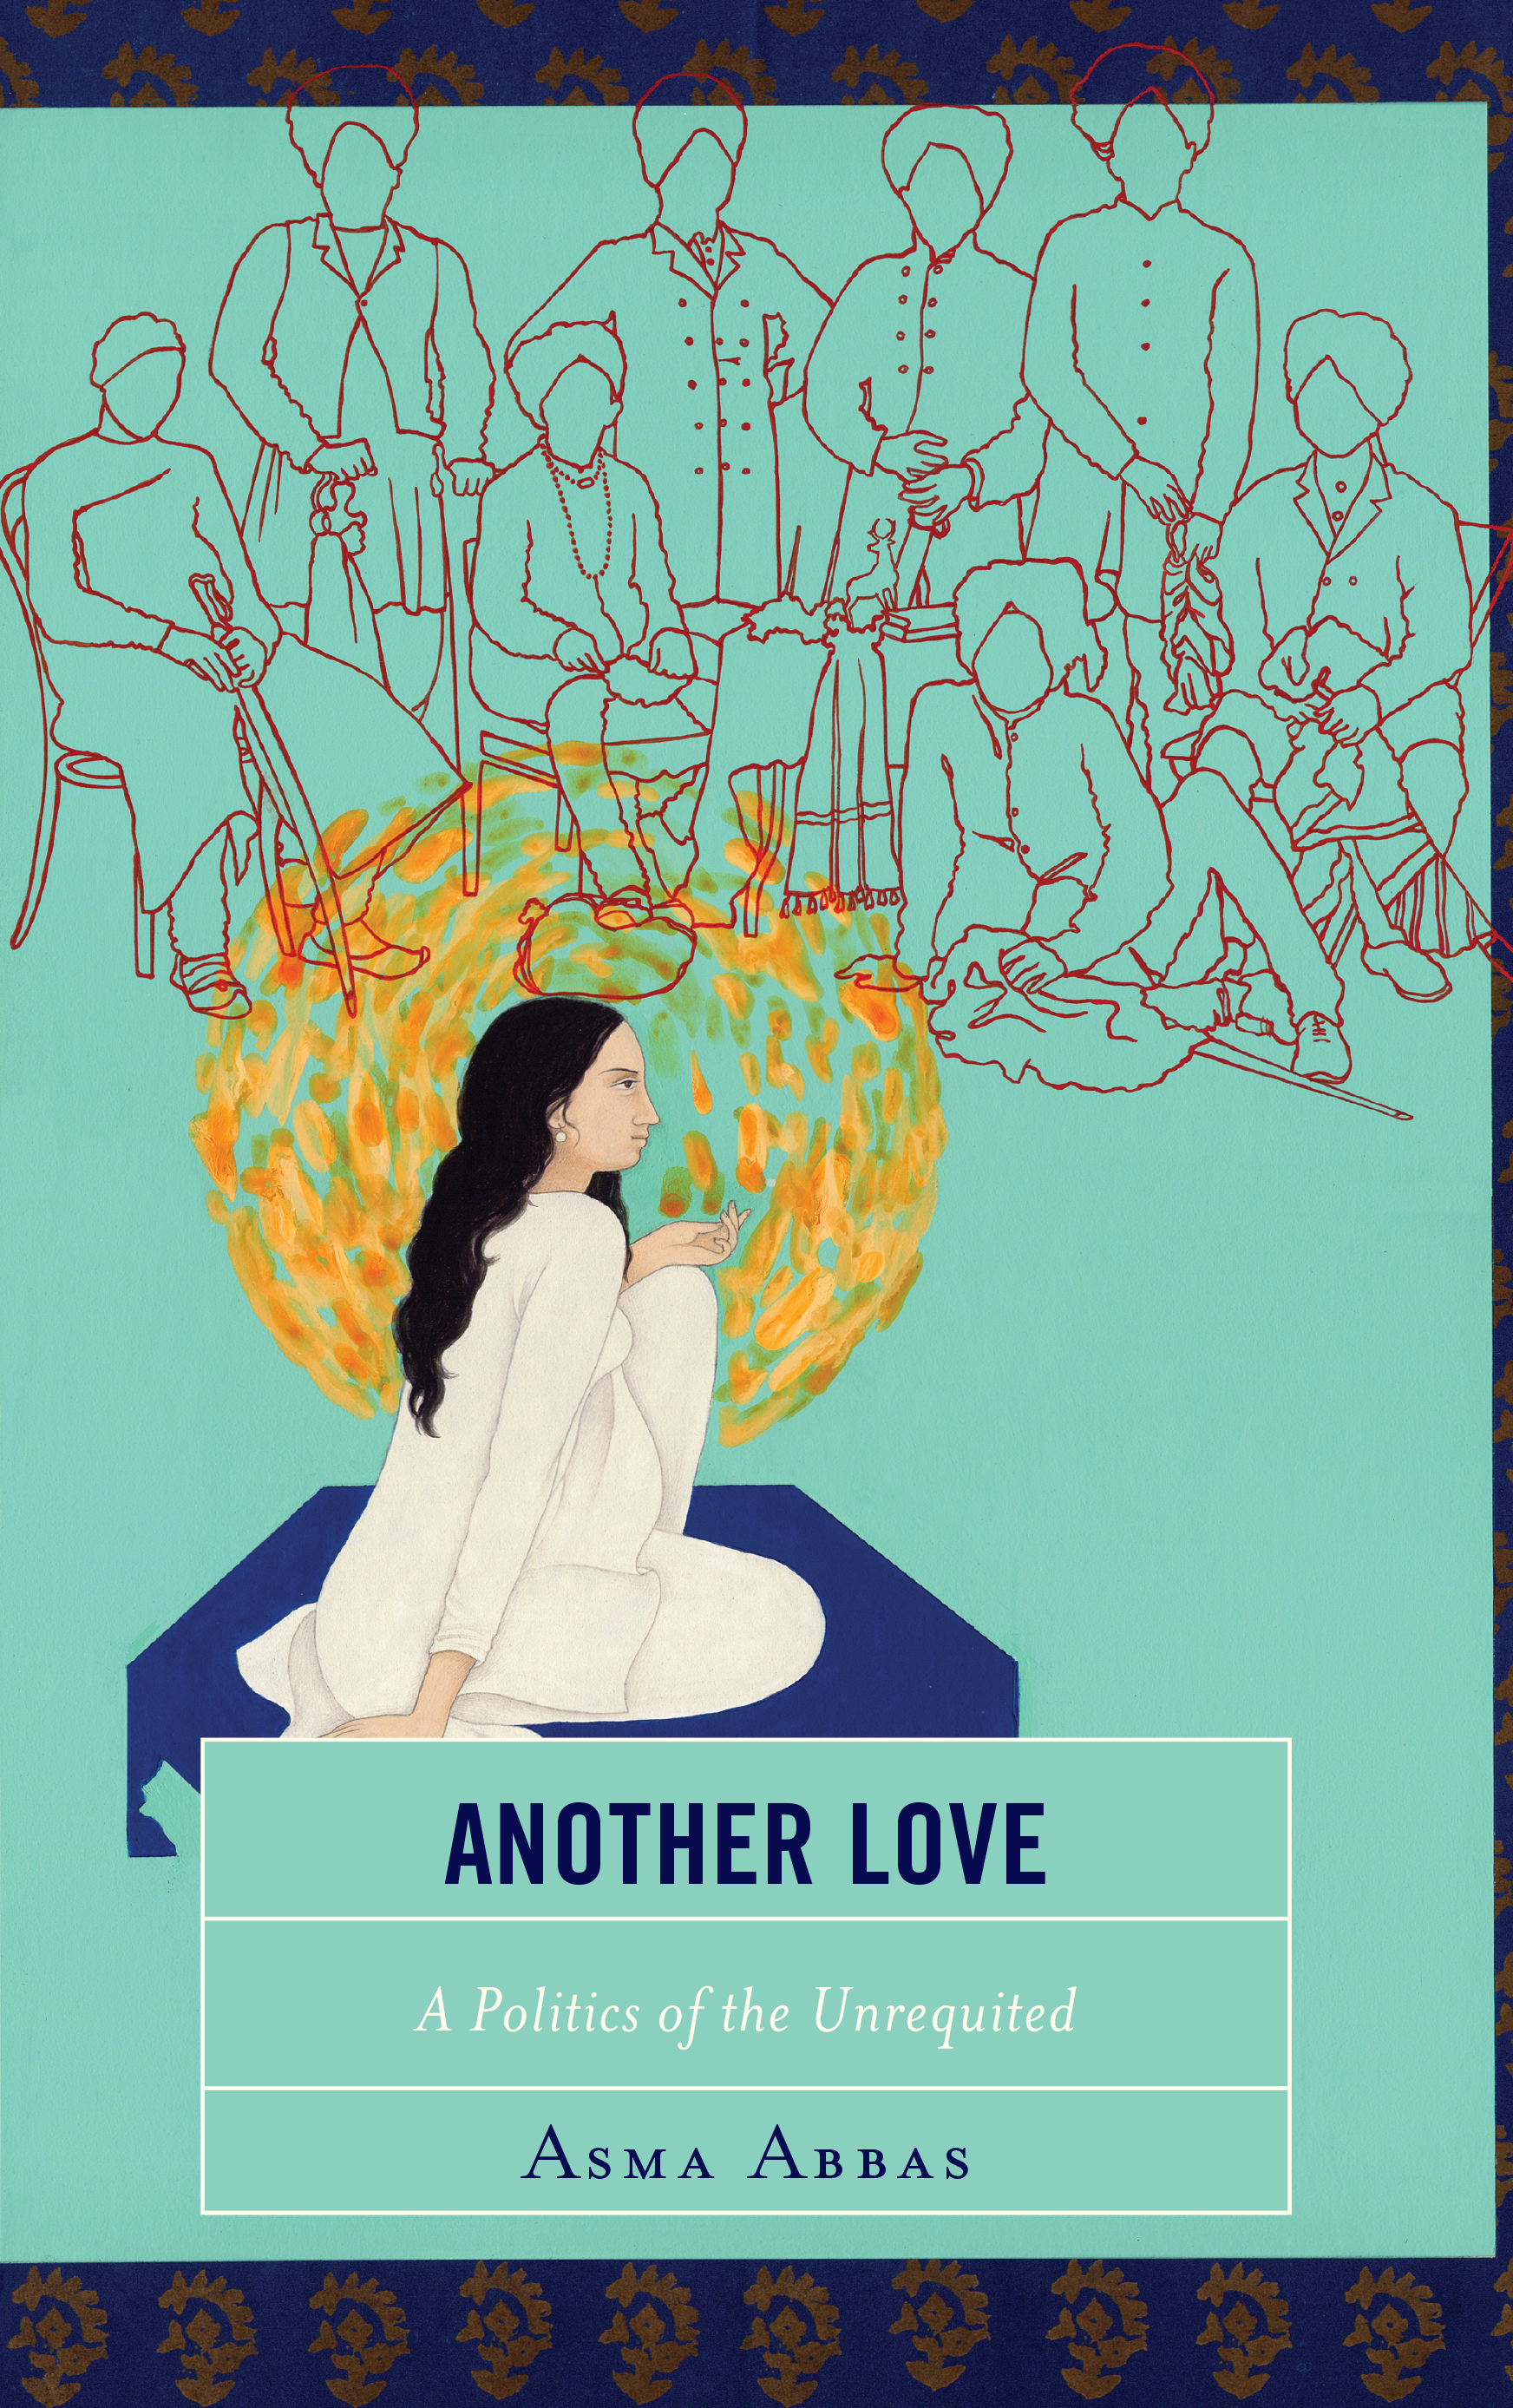 Another Love: A Politics of the Unrequited